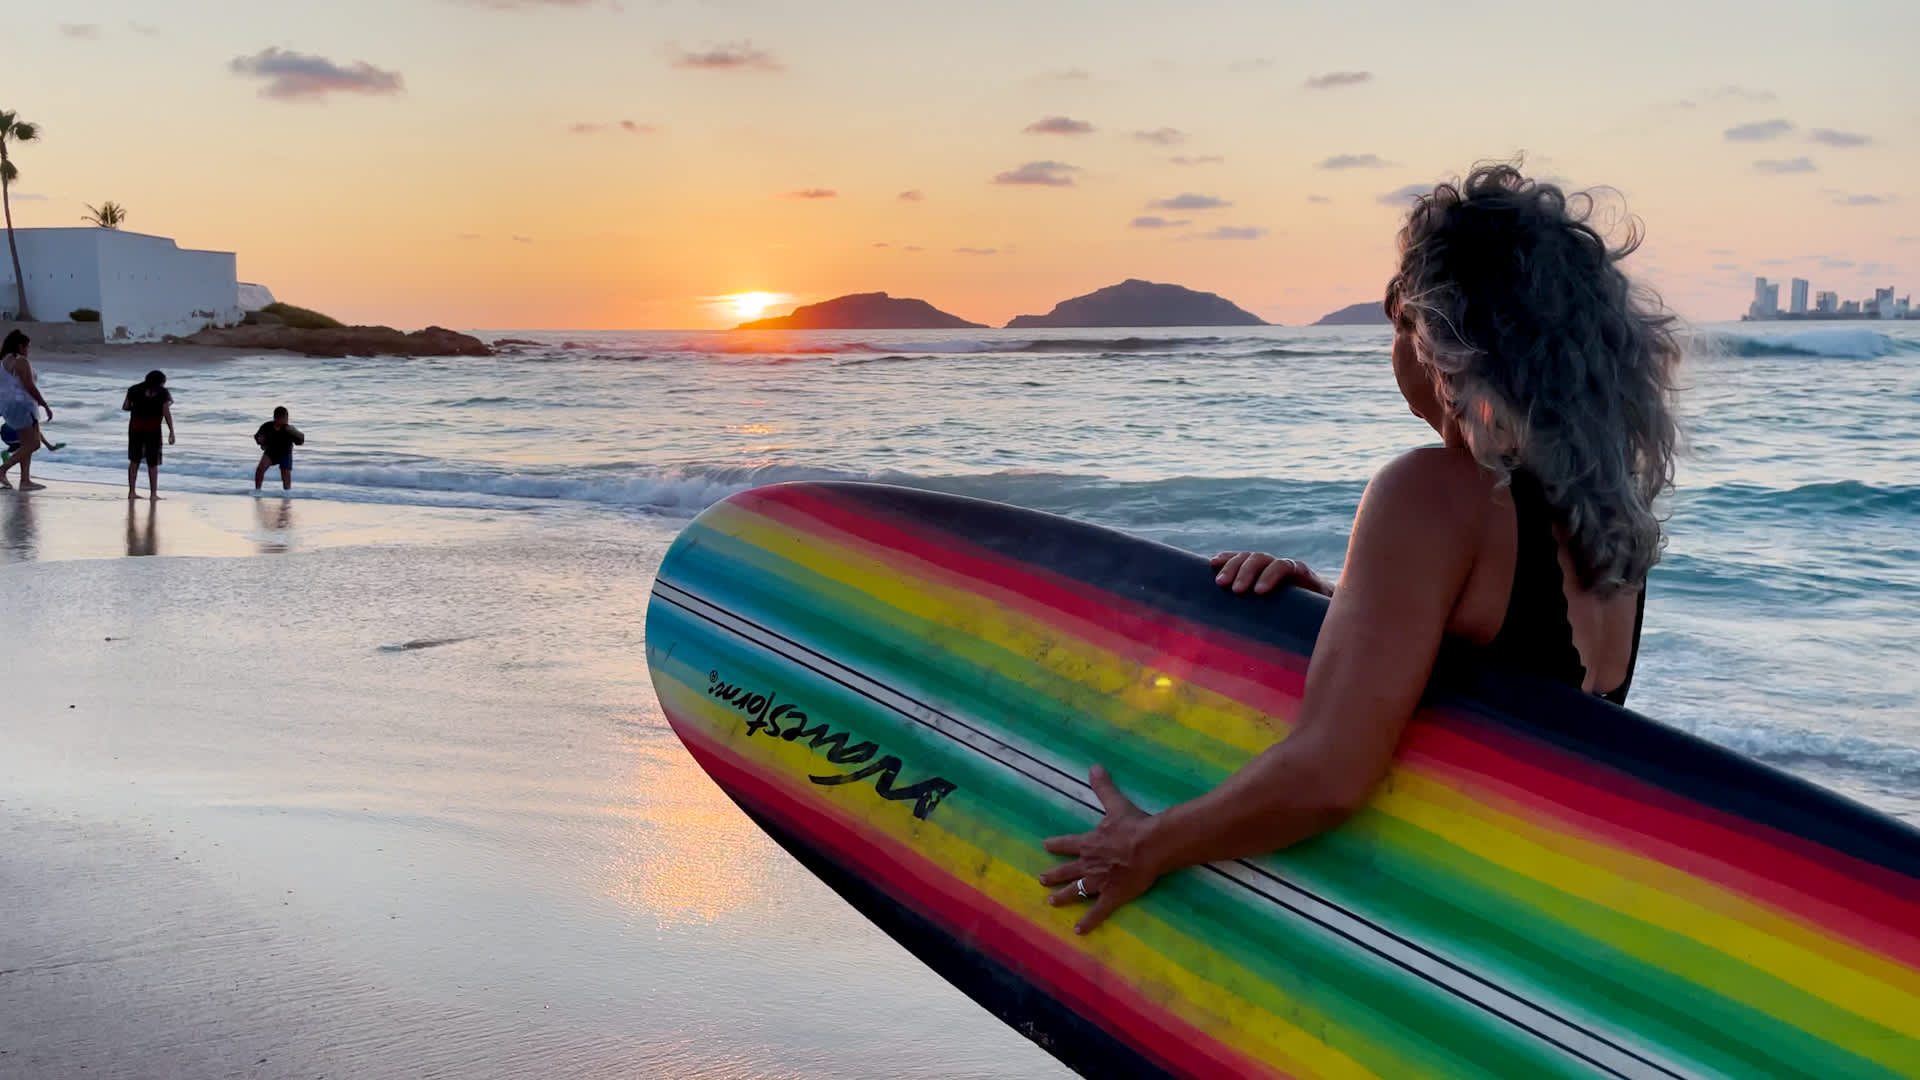 With Mazatlán's three islands just offshore, a sunset surf session is doubly wonderful.